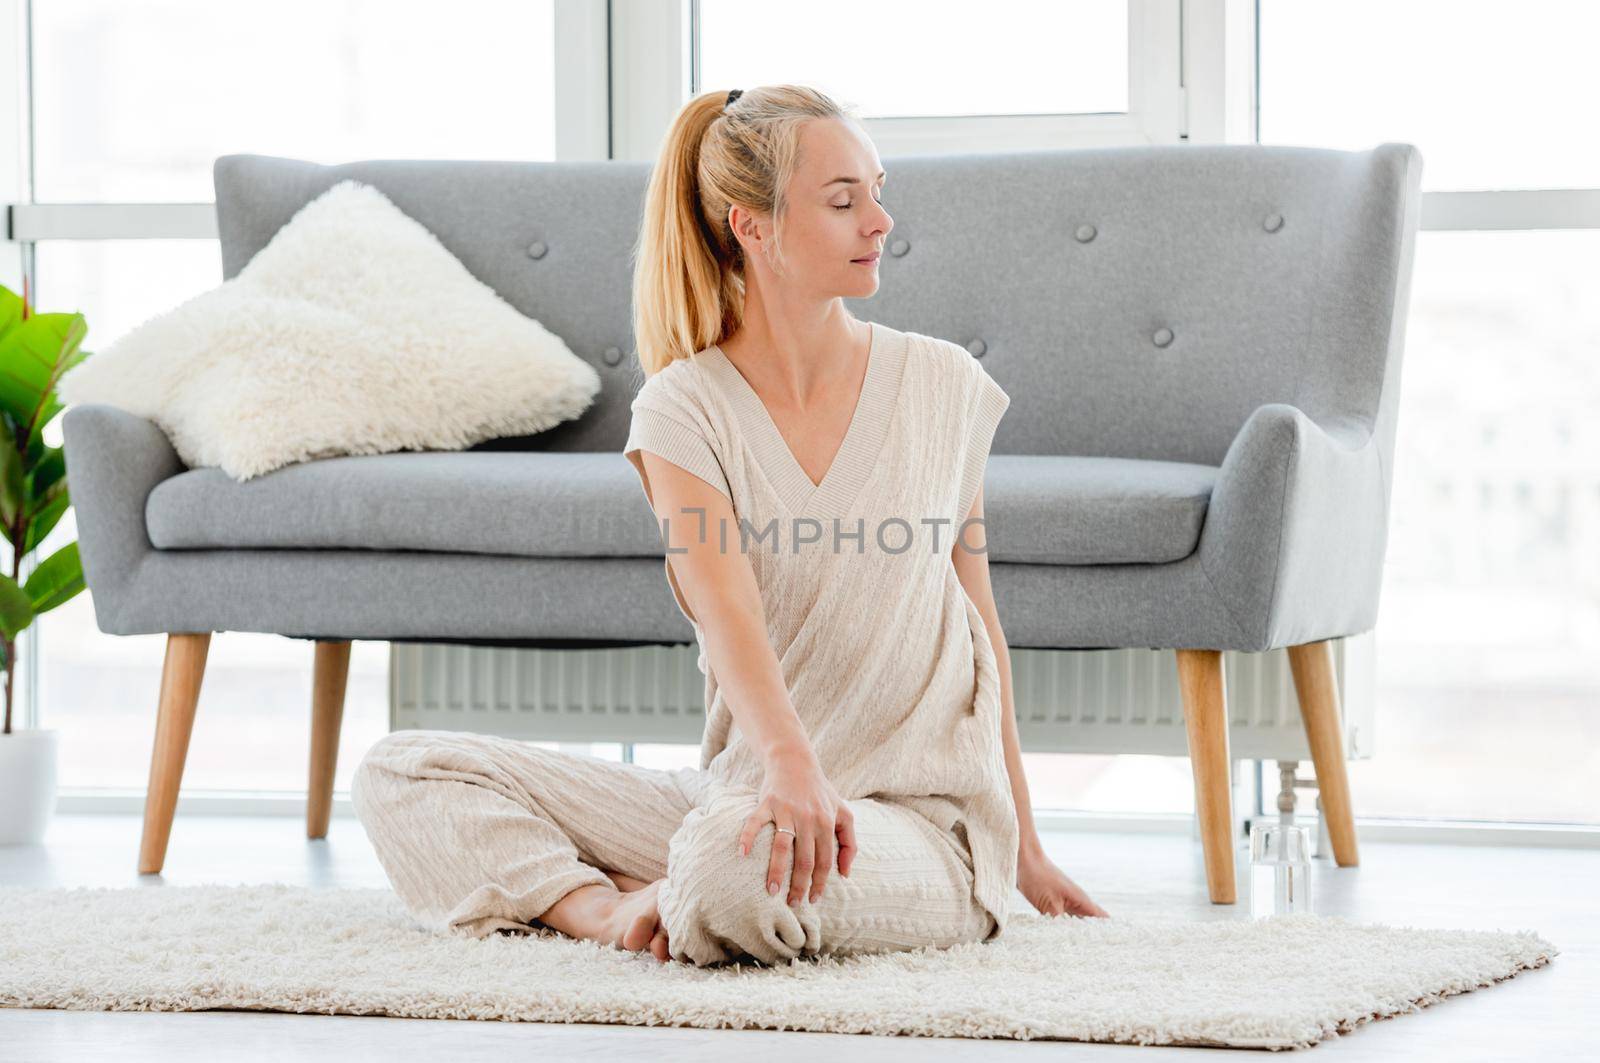 Blond girl turned to the side and stretch her back during morning yoga workout at home